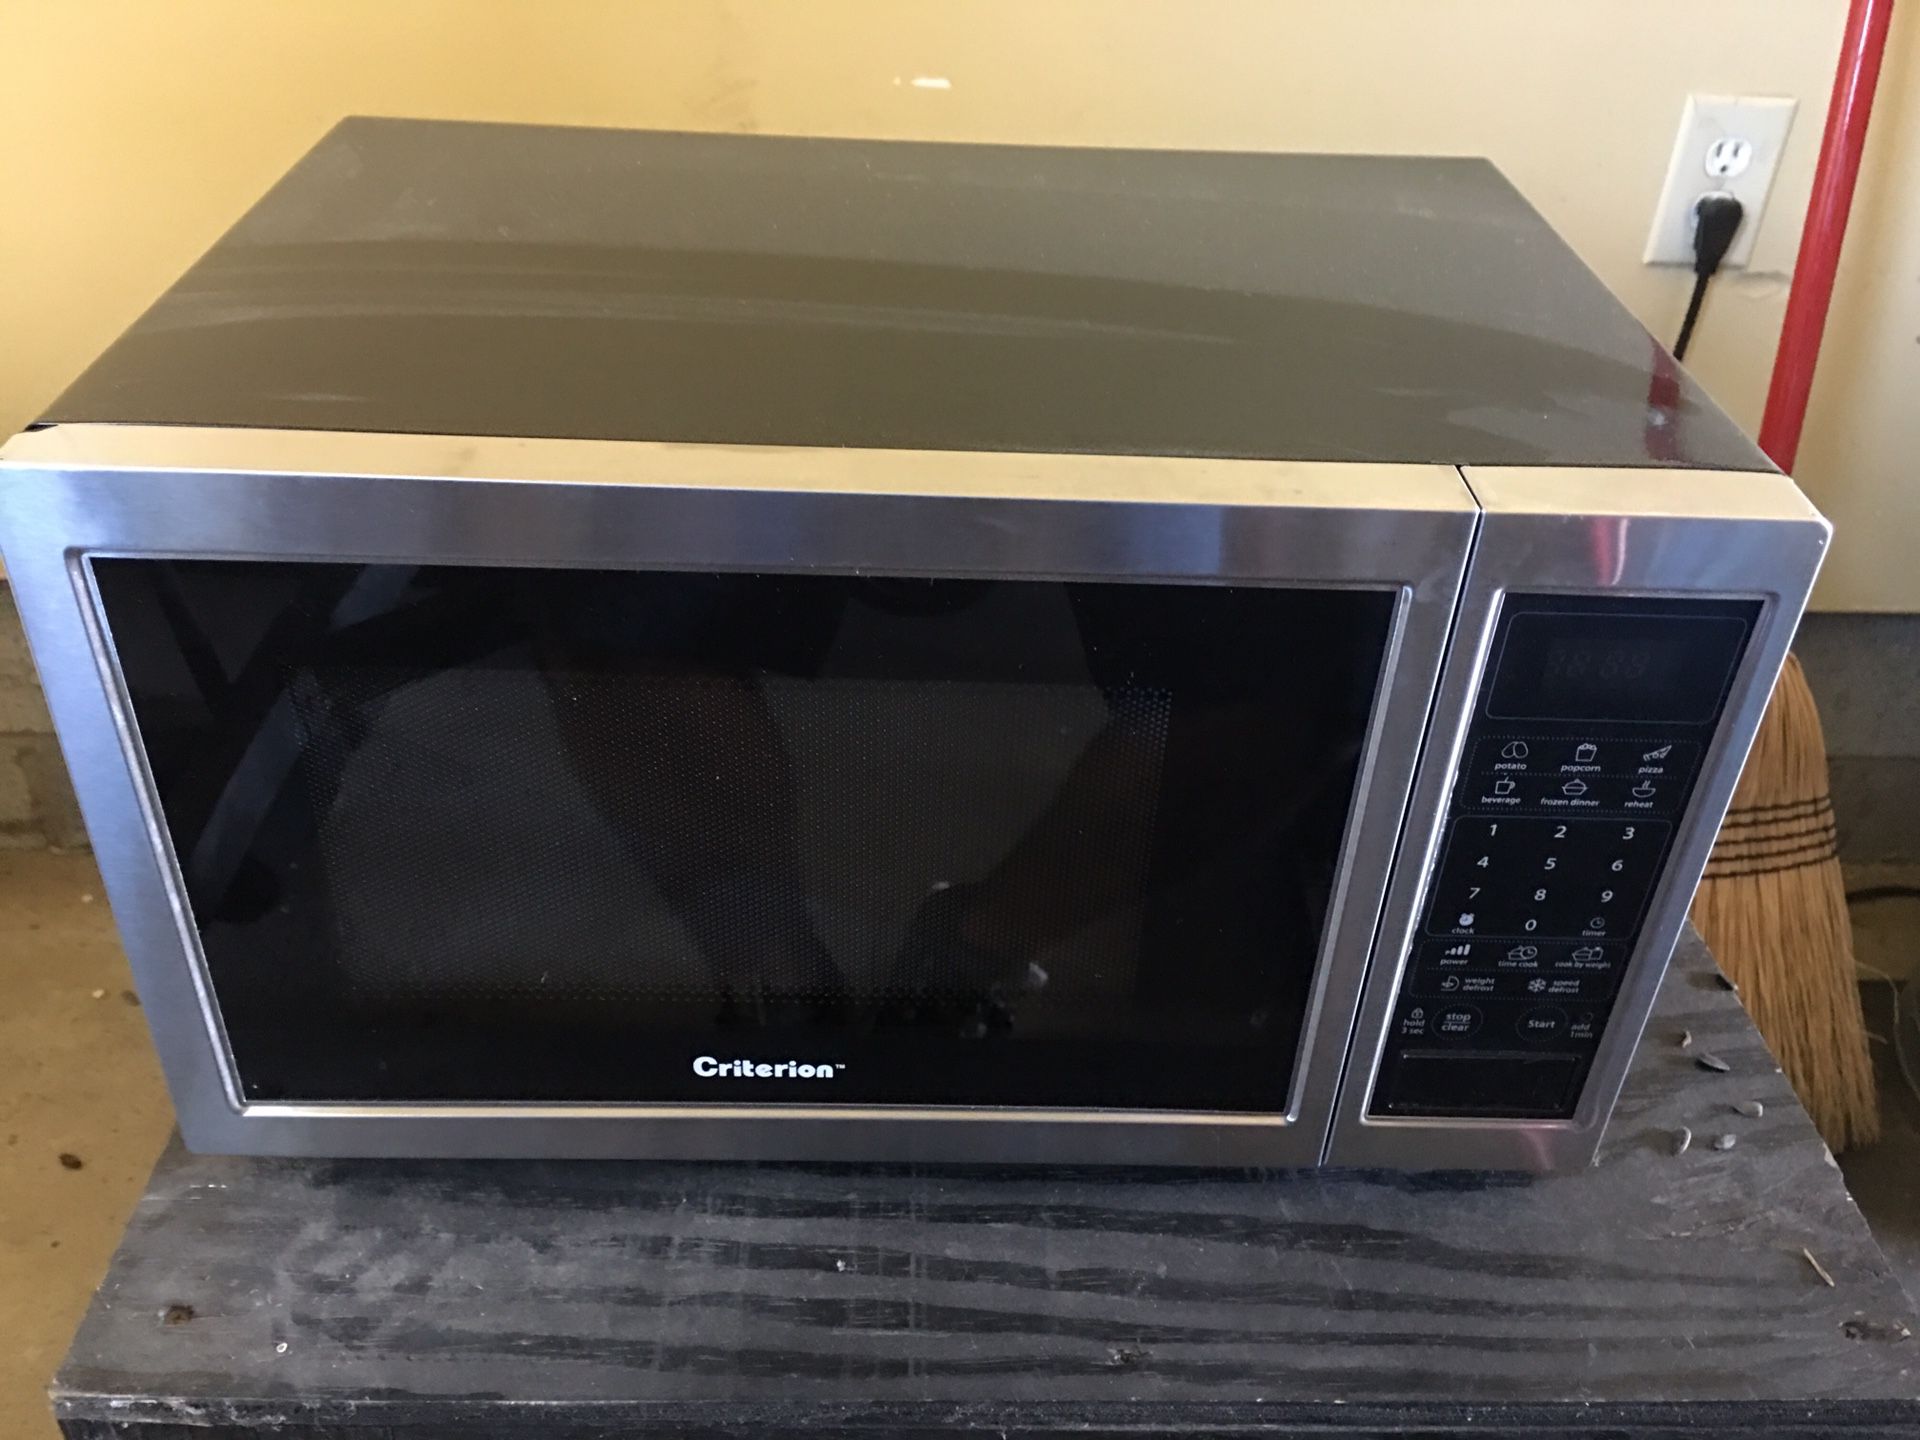 Criterion countertop microwave